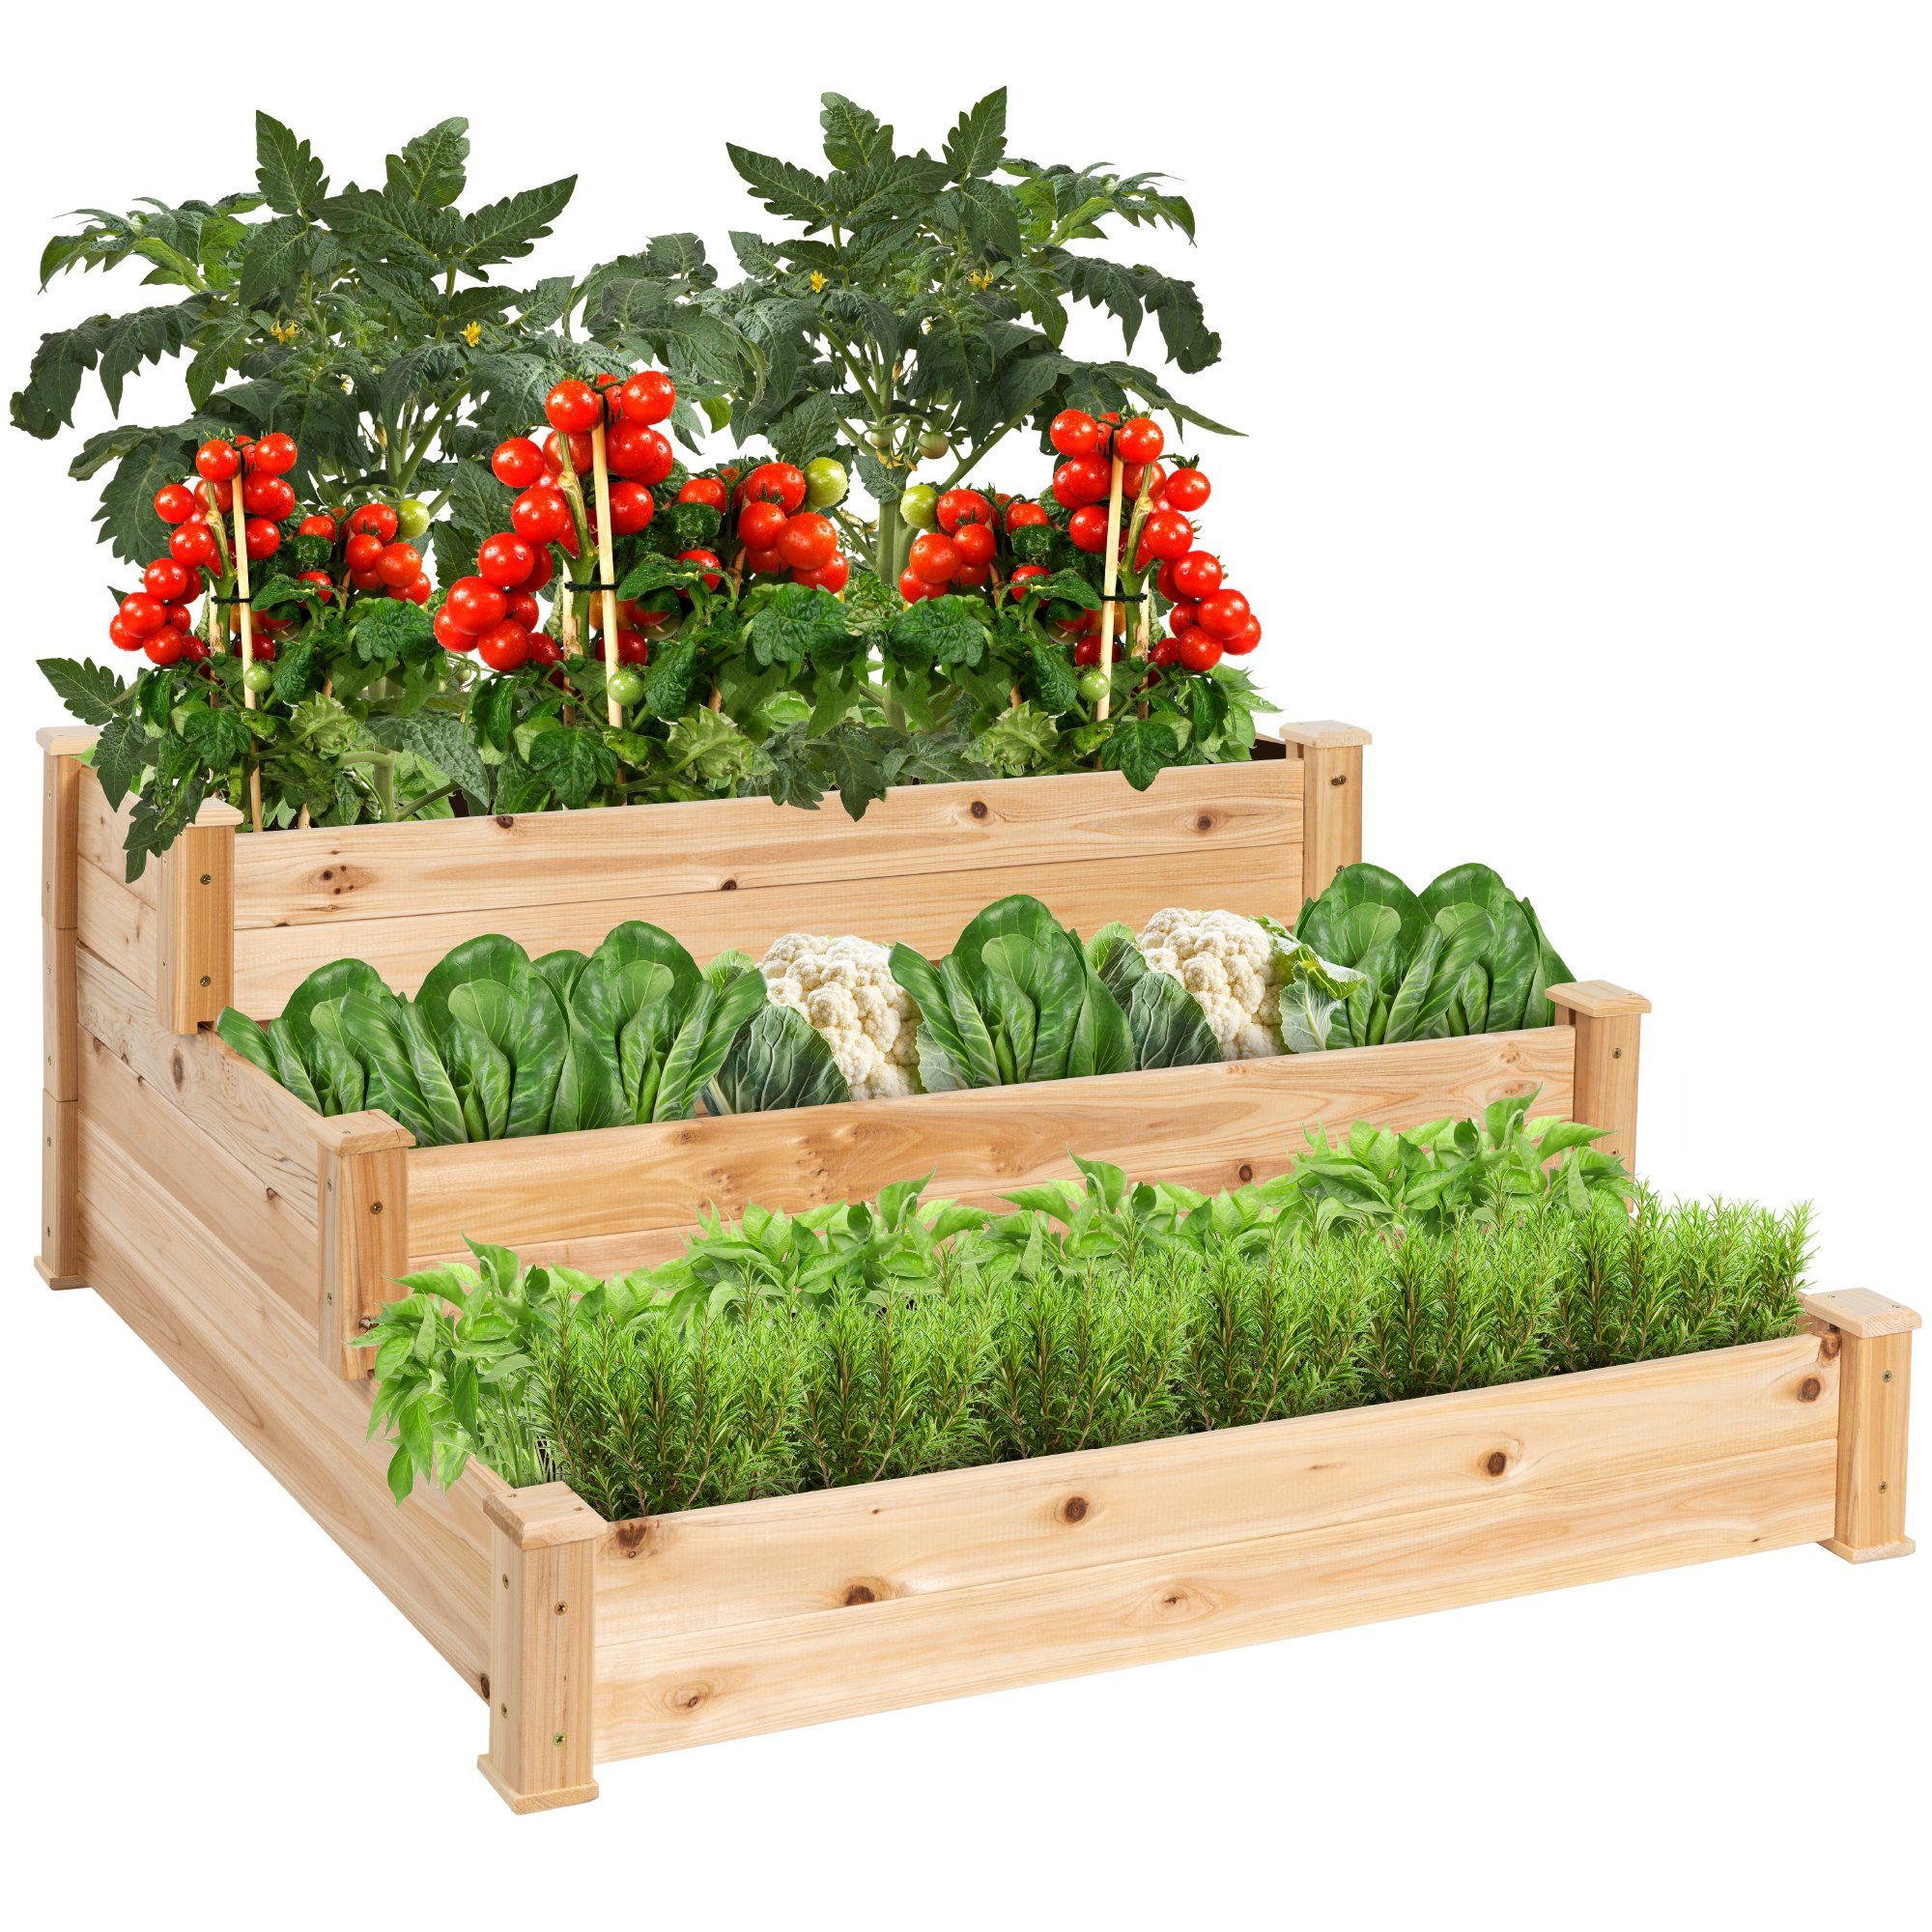 Best Choice Products 3-Tier Fir Wood Raised Garden Bed Planter Kit for Plants, Vegetables, Outdoo... | Walmart (US)